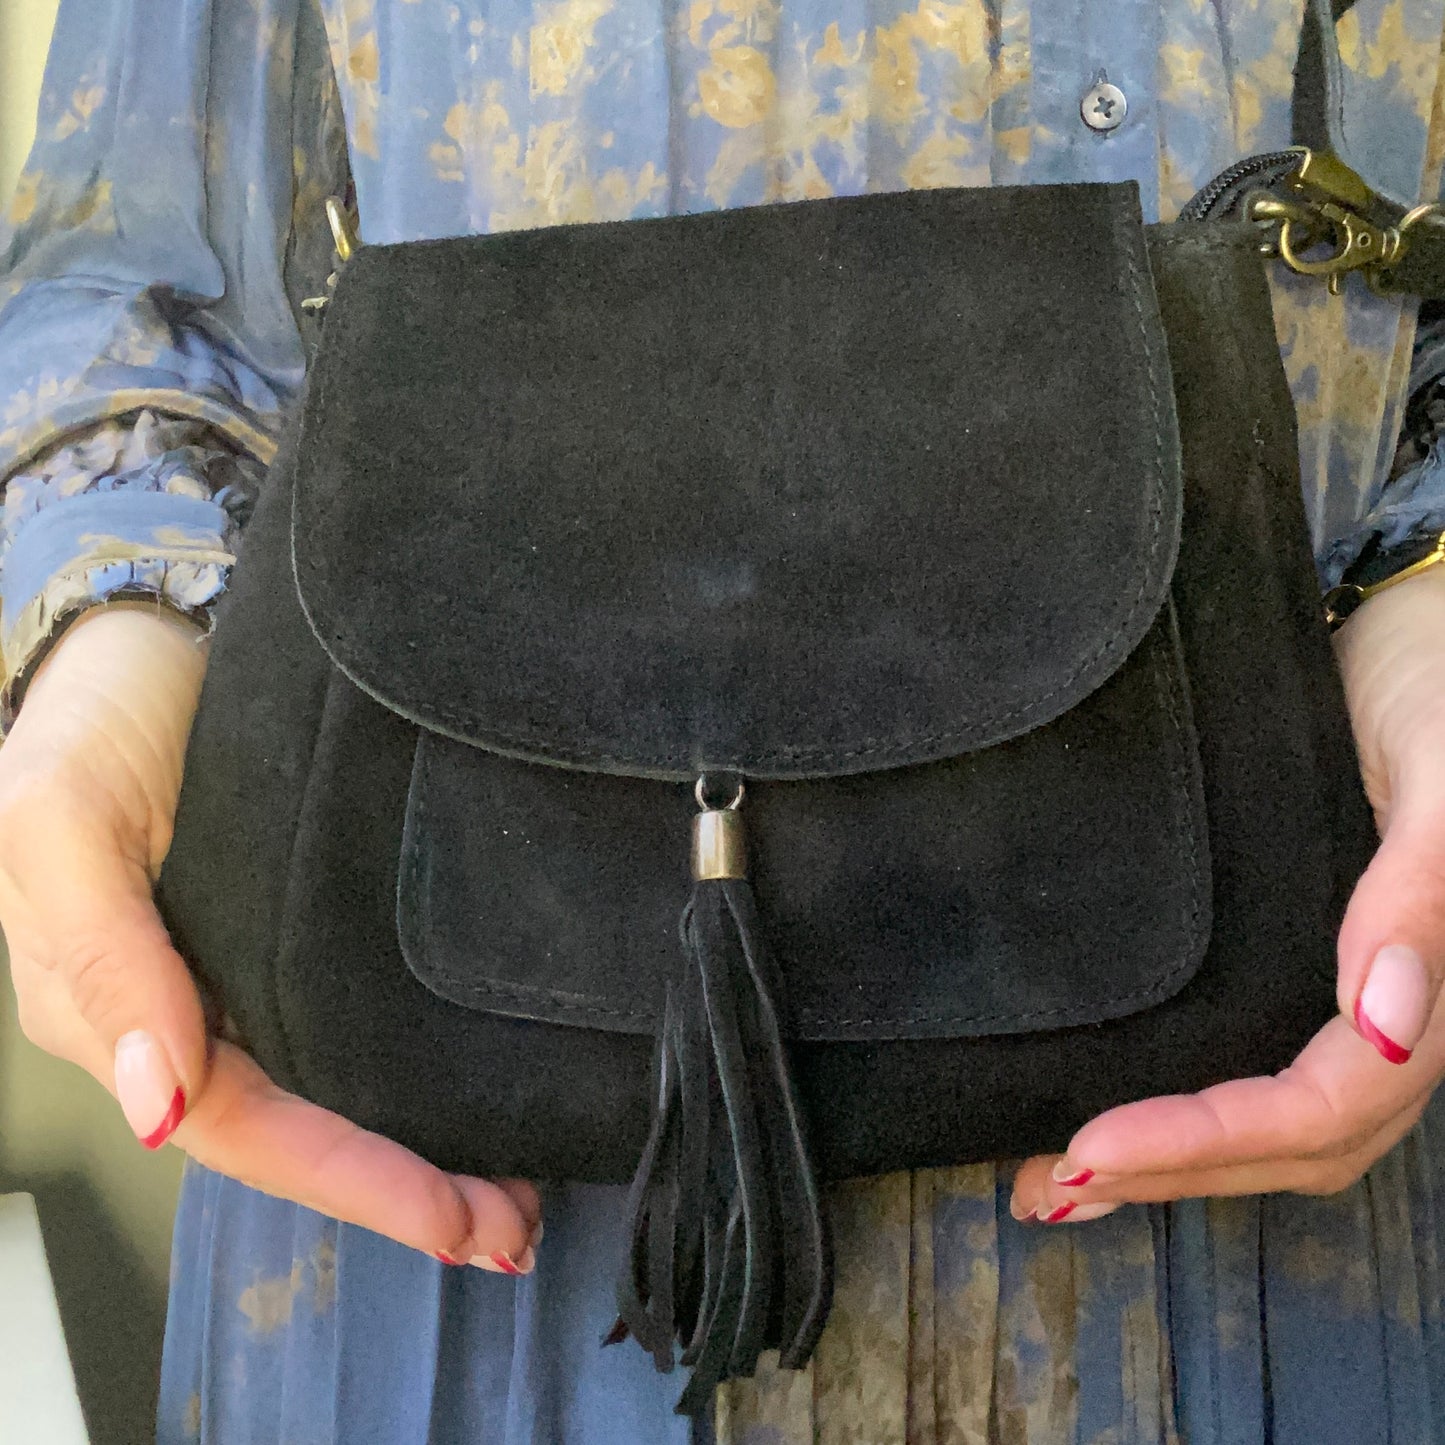 The Suede Cross Body Saddle Bag